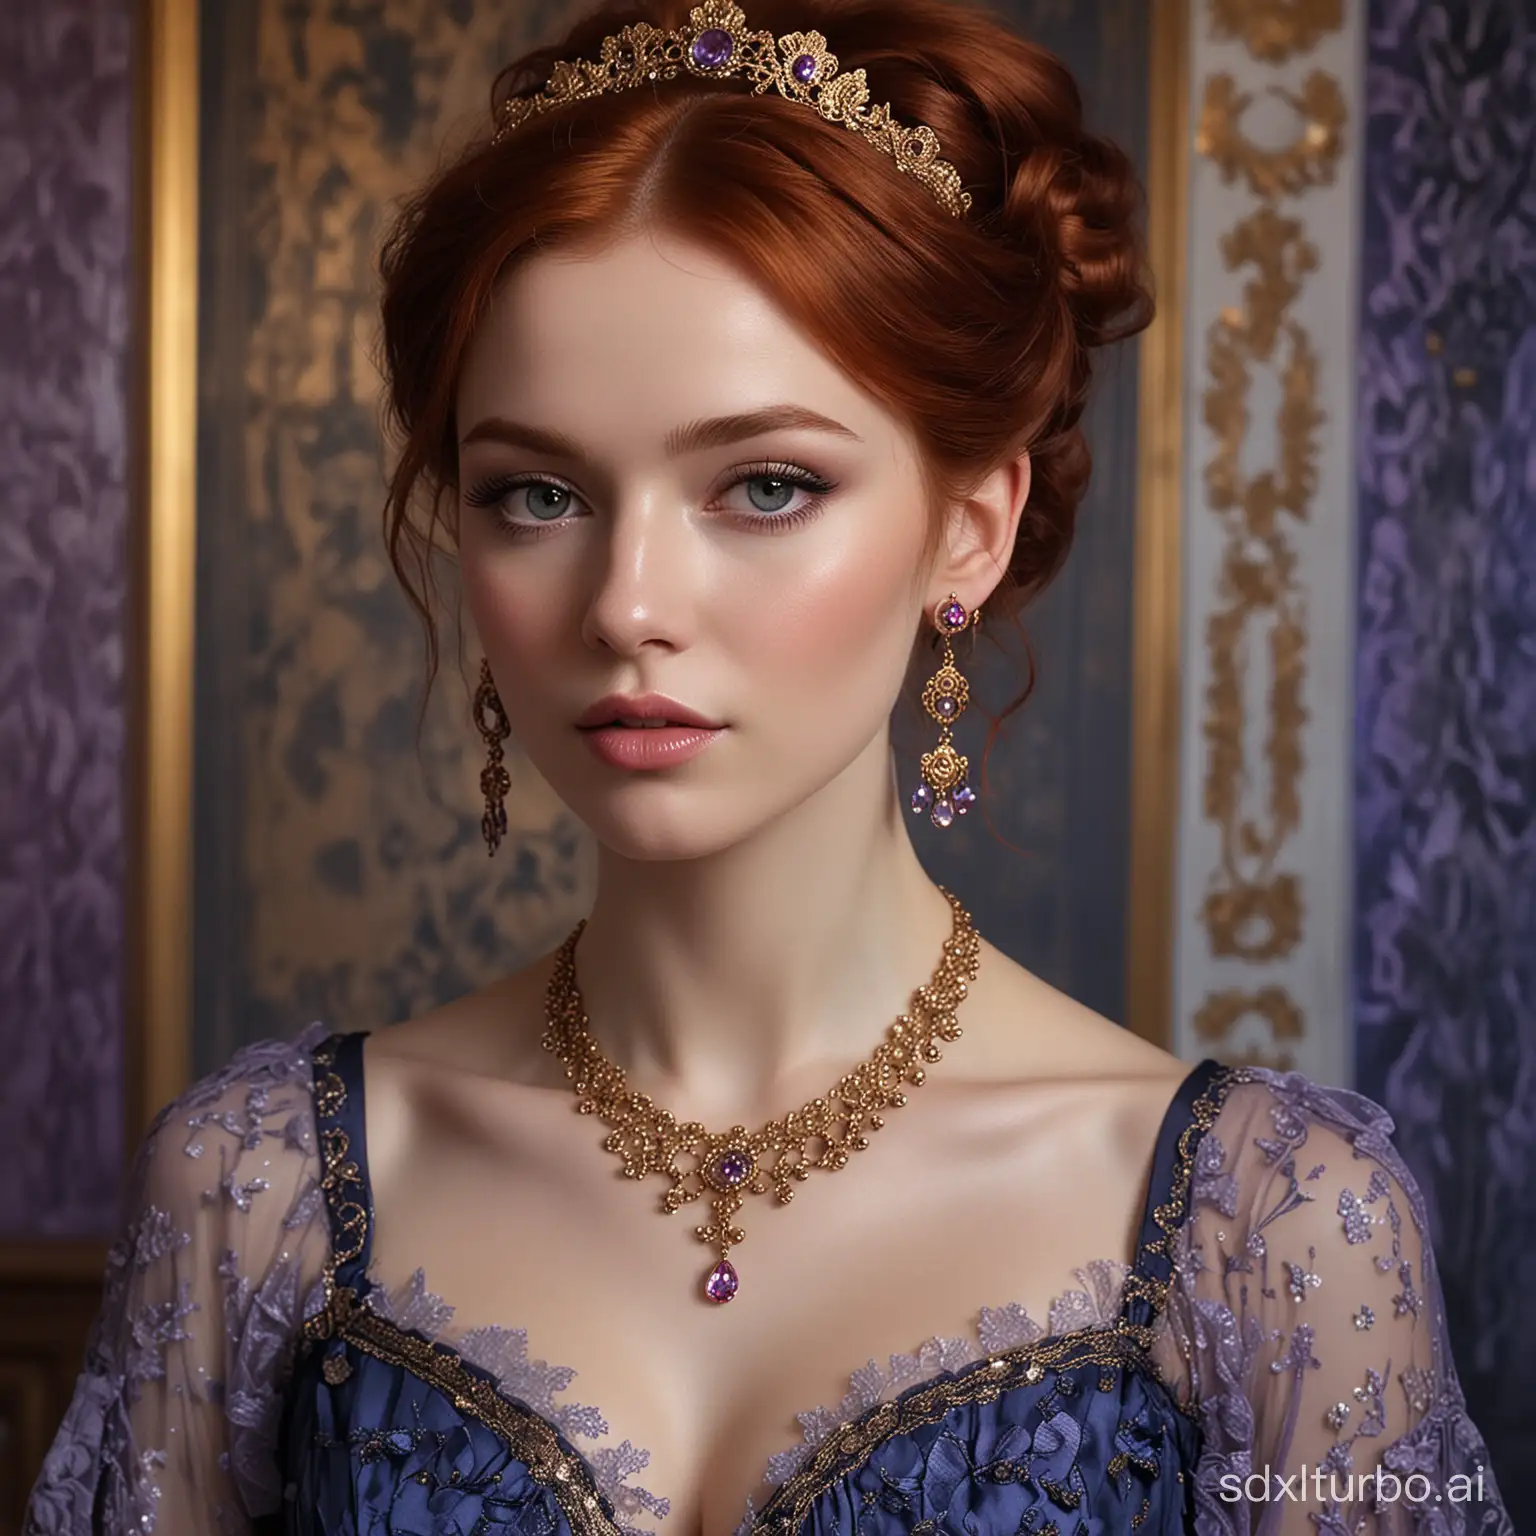 Elegant-Redhead-in-Lace-Dress-with-Gothic-Overtones-and-Cinematic-Quality